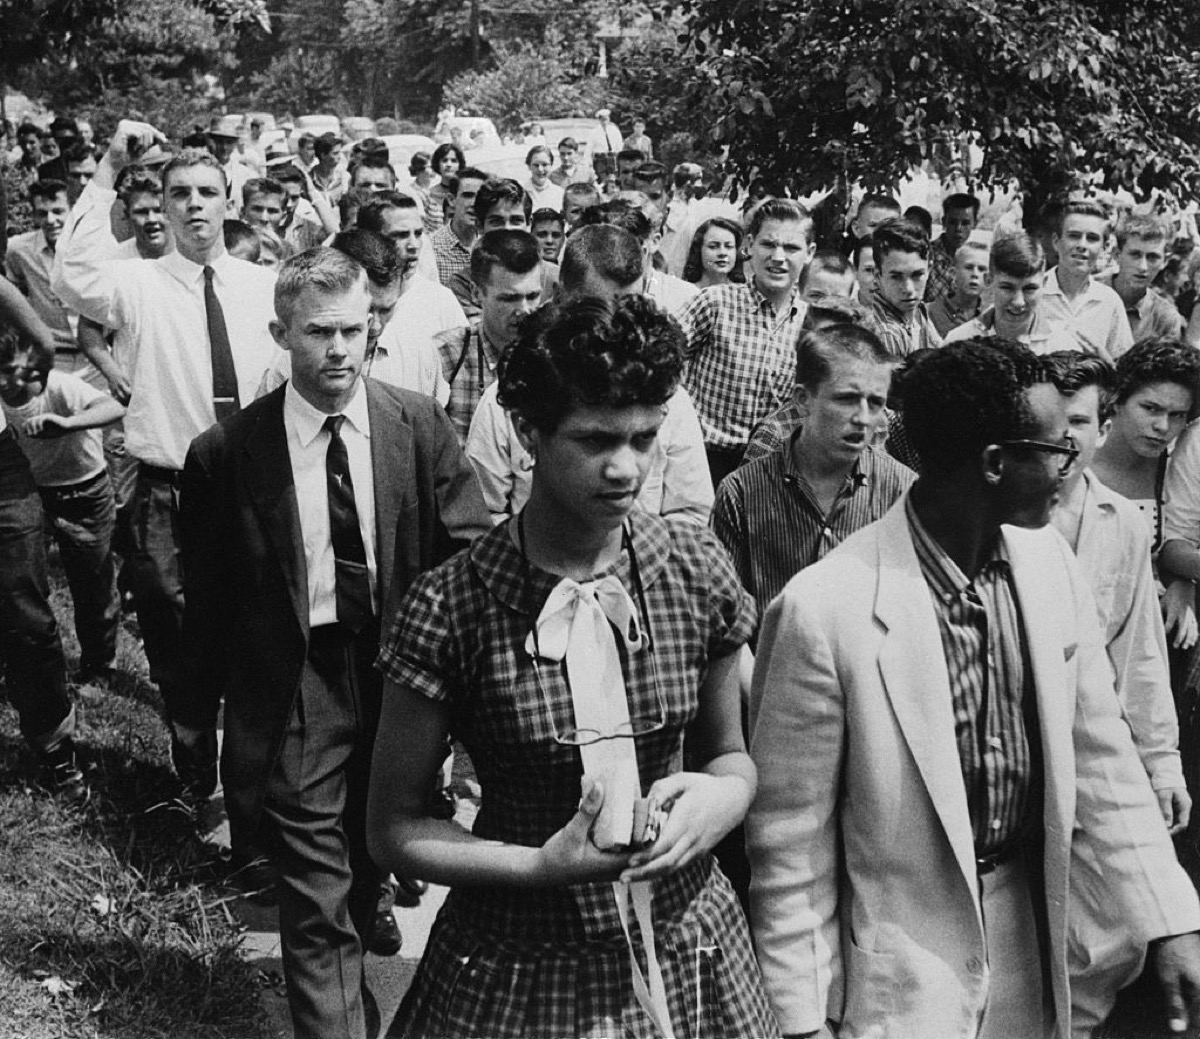 Dorothy Geraldine Counts, 15 (left) is followed by a crowd of jeering teenagers as she leaves Harding high school with her escort, Dr R.A. Hawkins, 4th September 1957